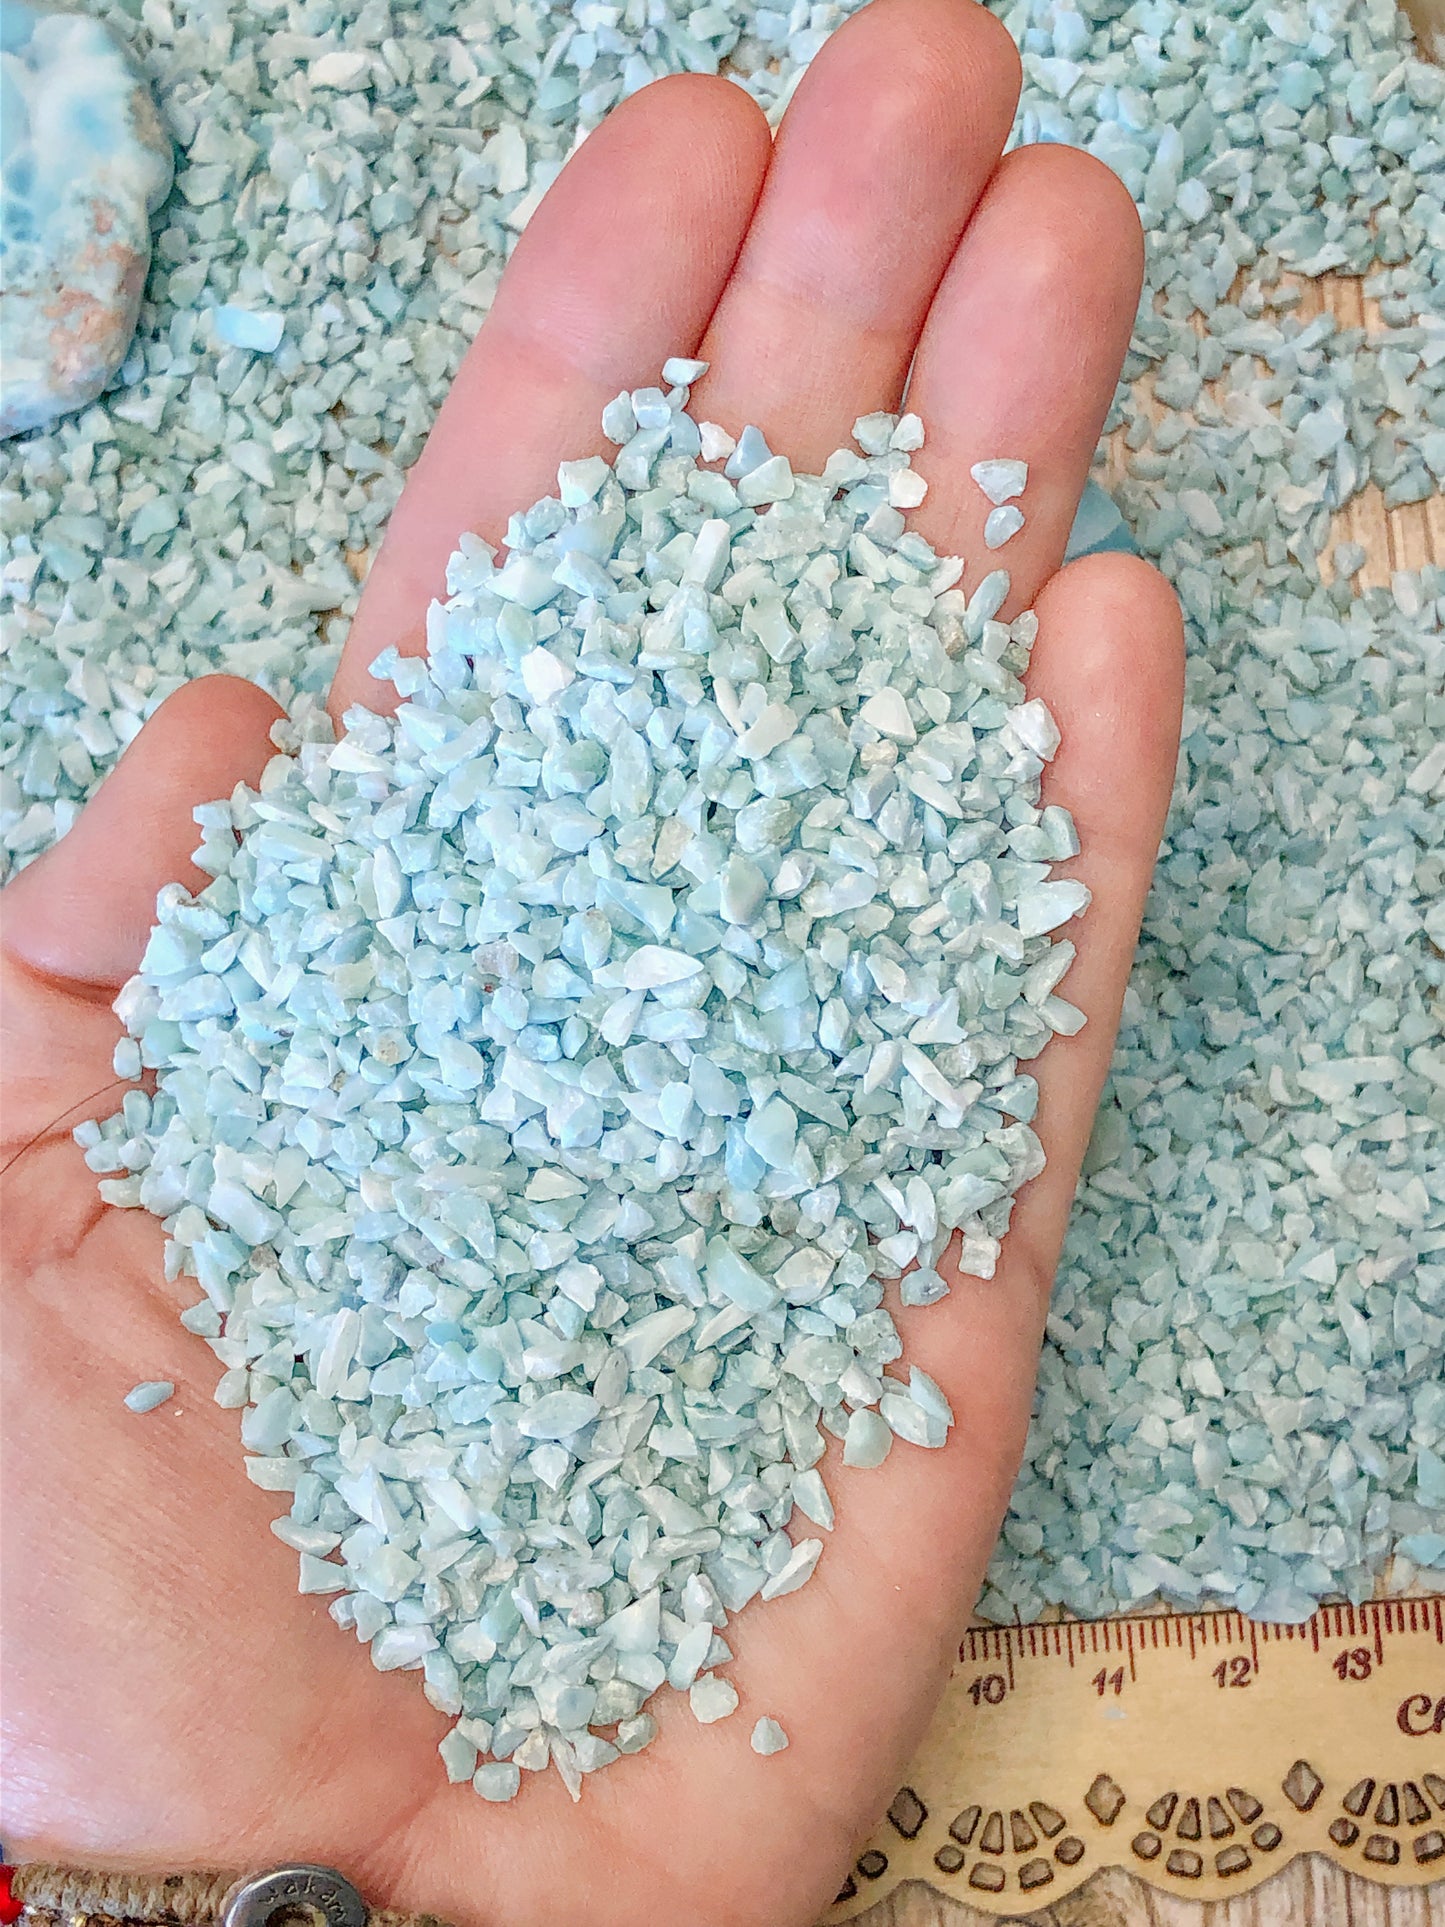 Crushed Baby Blue Larimar (Grade A) from the Dominican Republic, Coarse Crush, Gravel Size, 4mm - 2mm